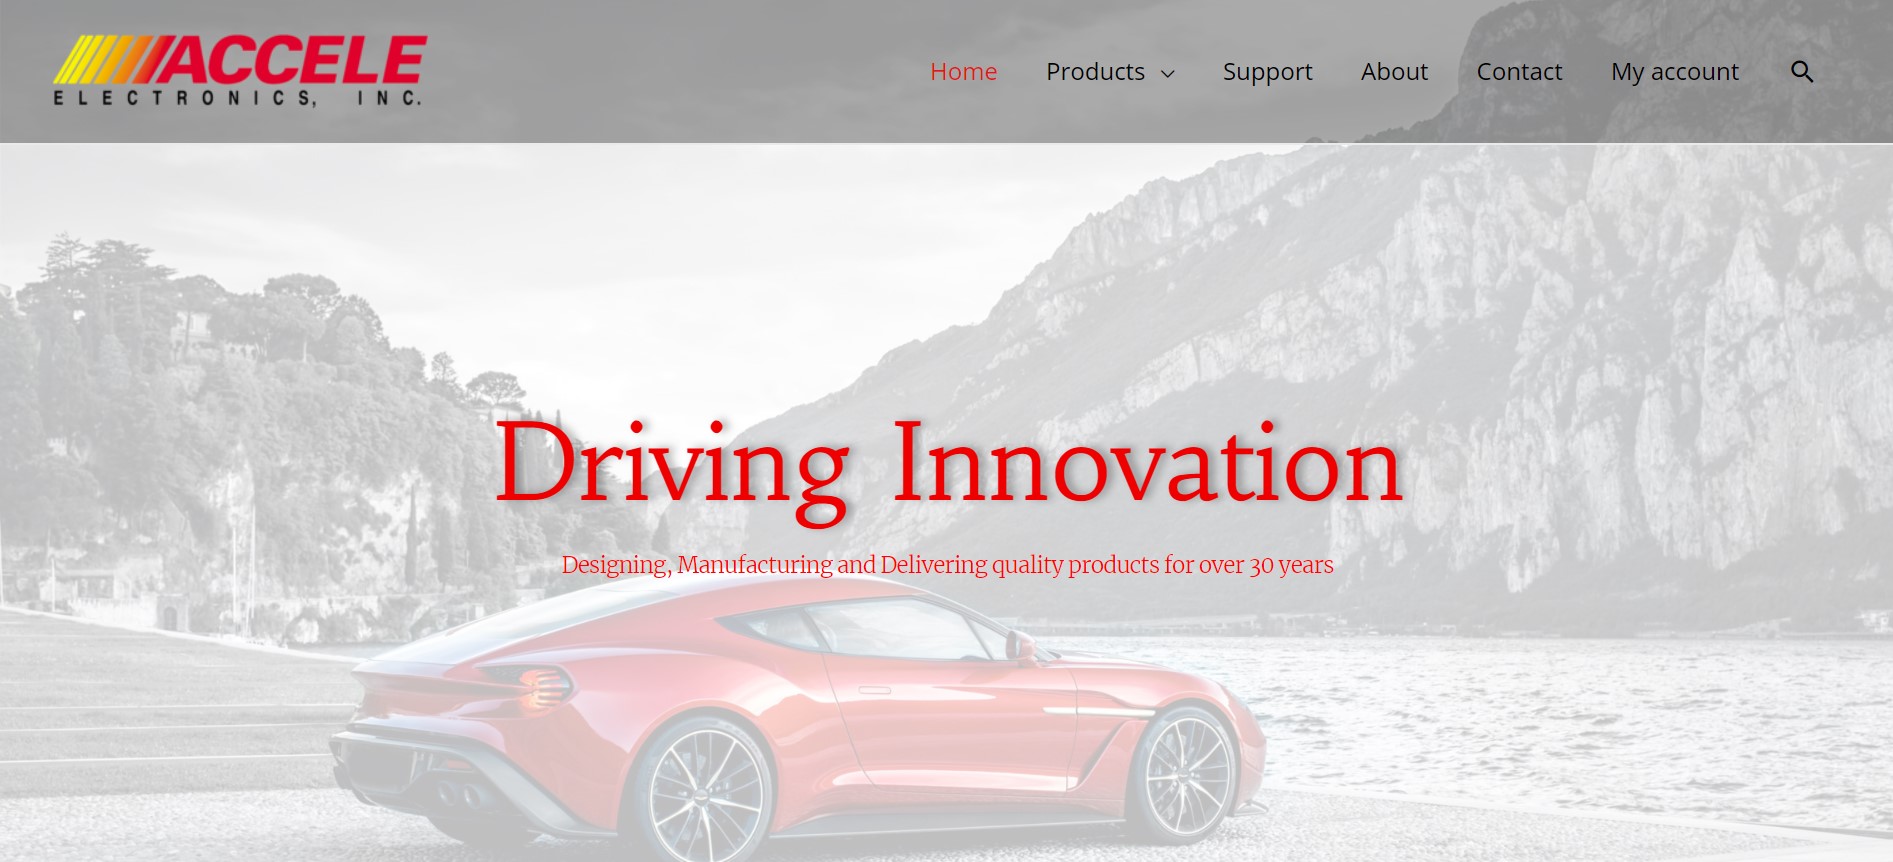 Accele Electronics Launches New Website | THE SHOP